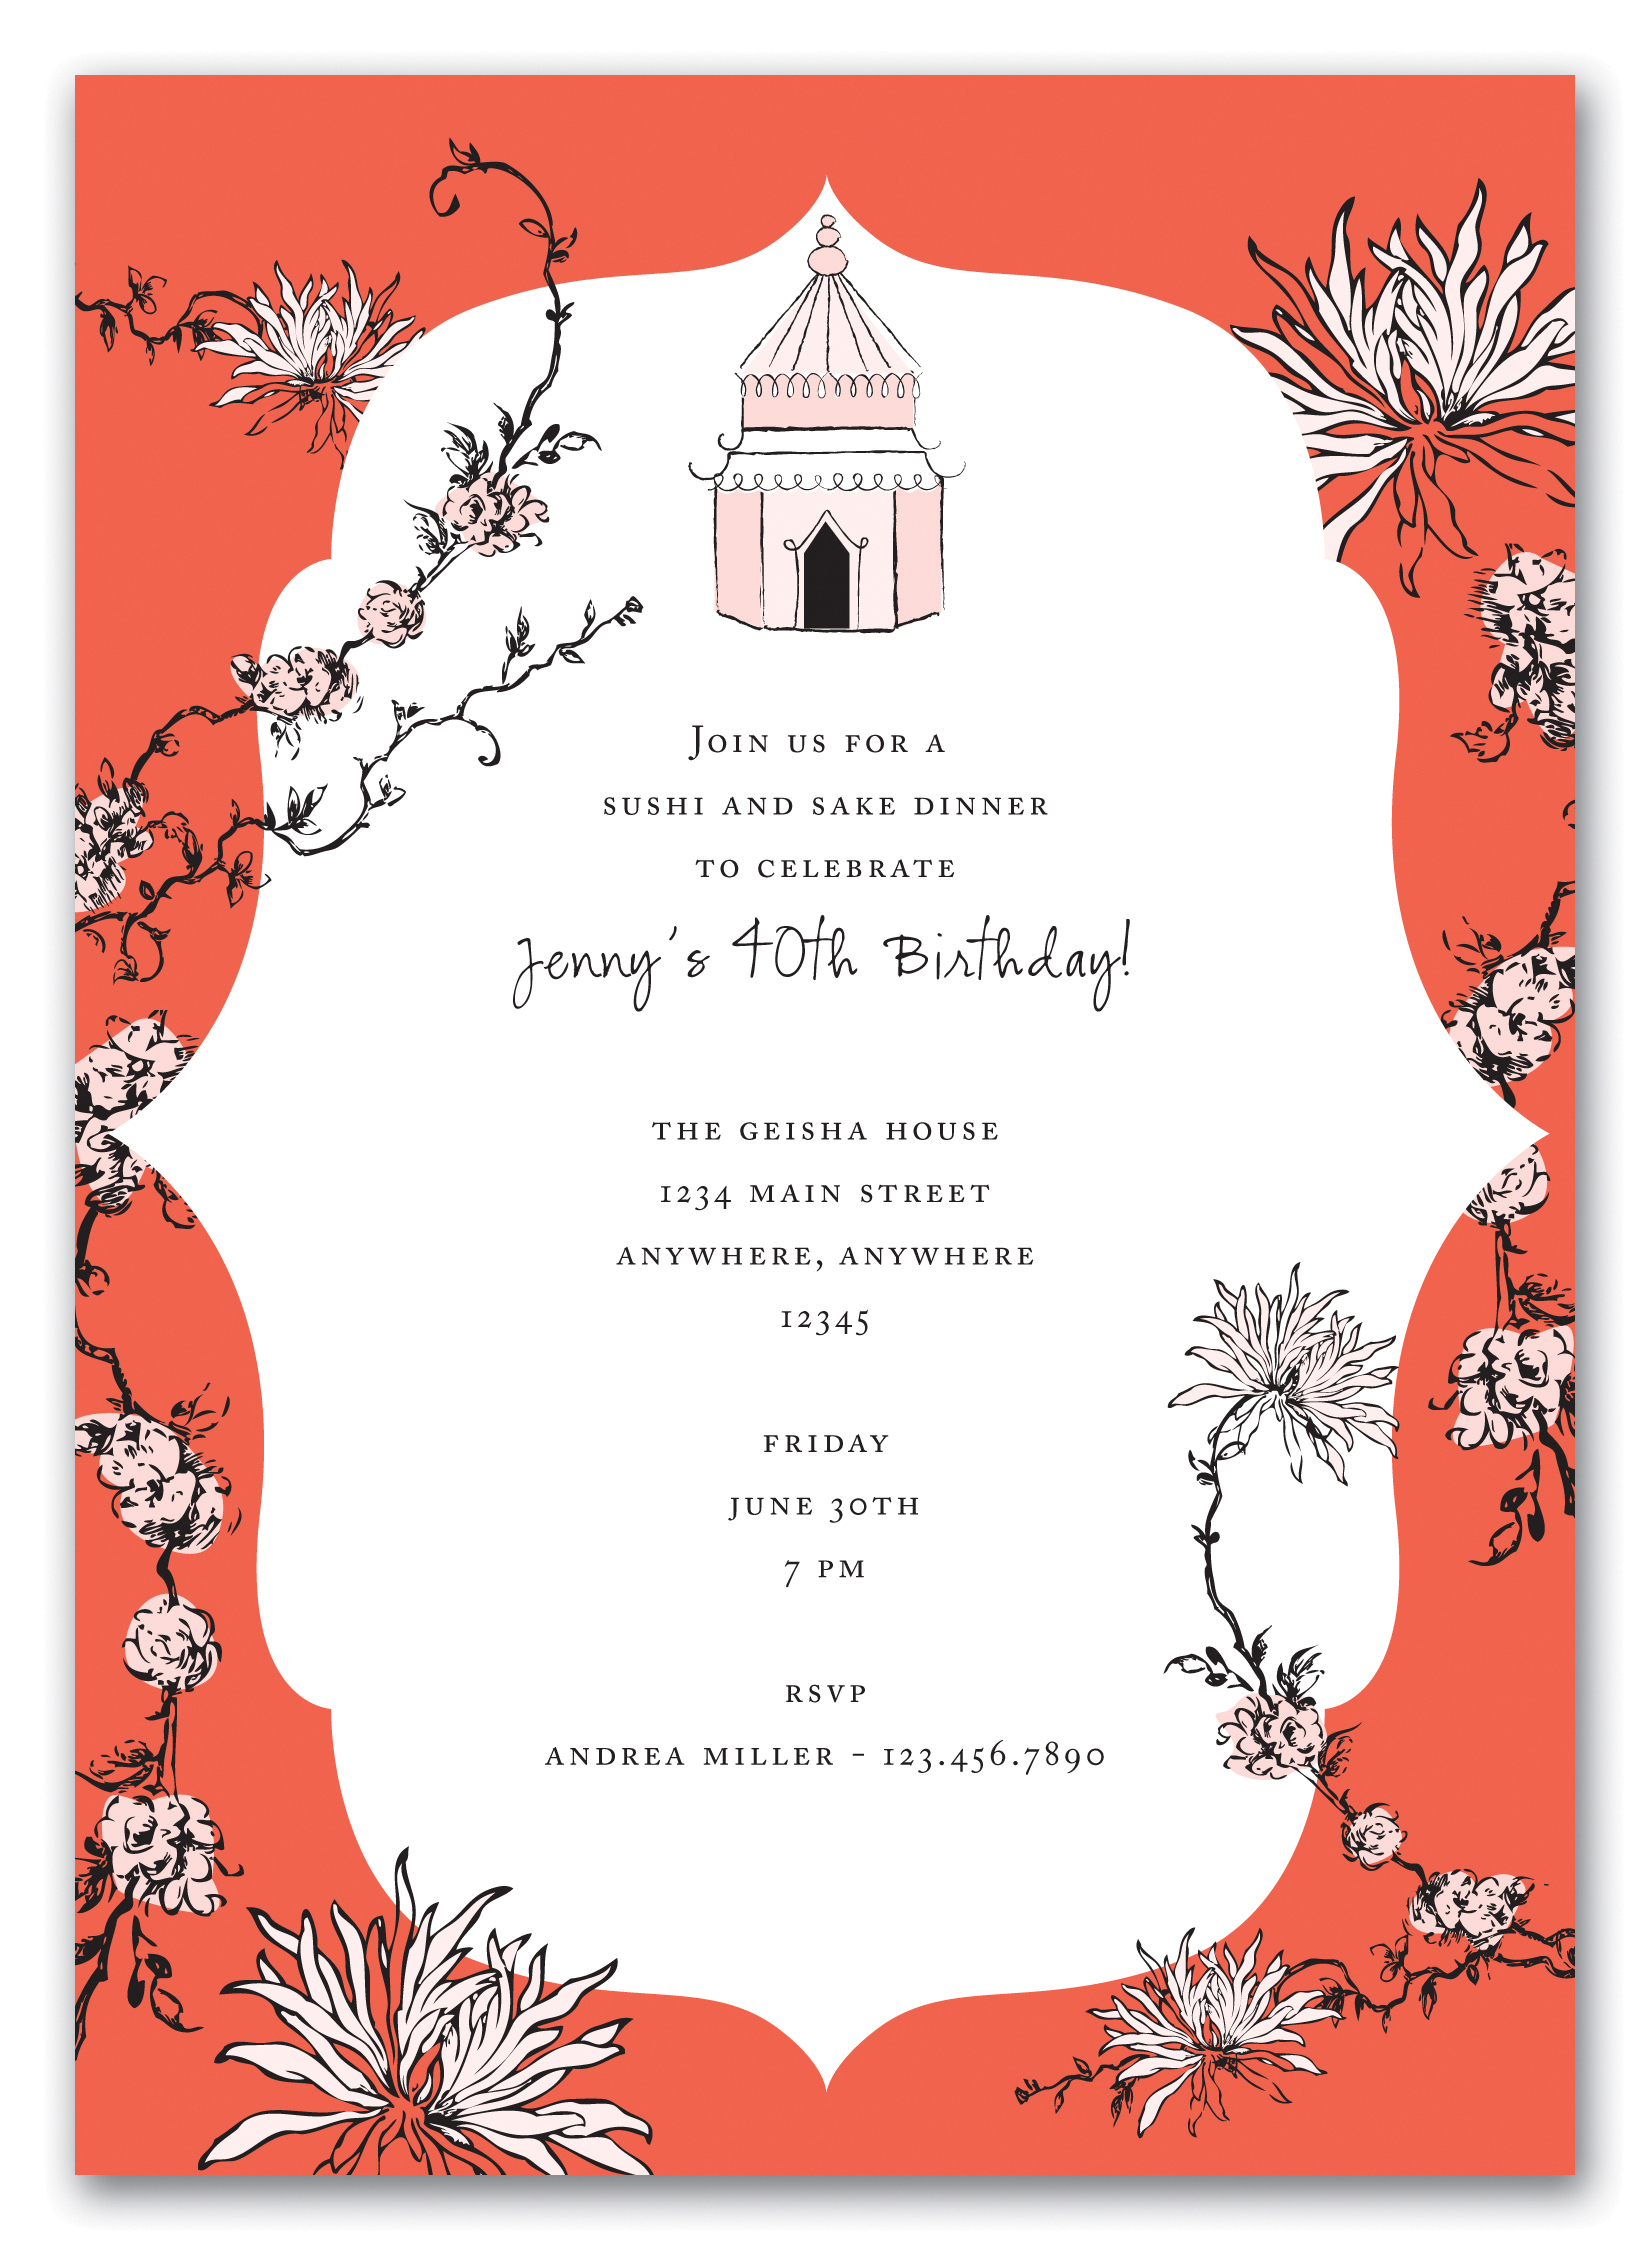 Pink and orange invitations  
															/ Tart Paperie							